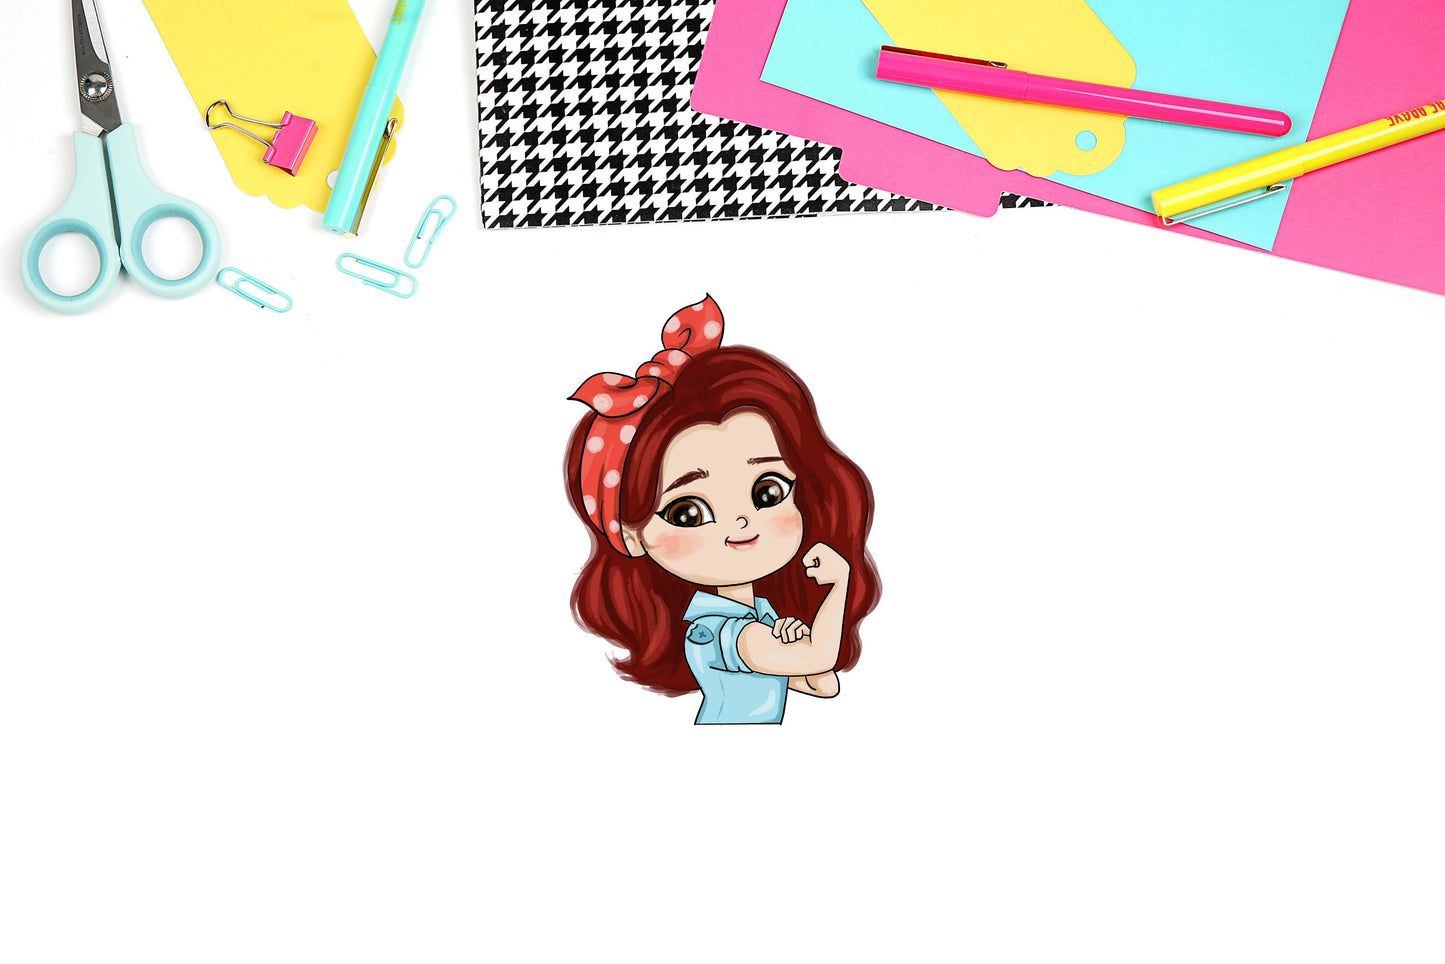 Rosie the Riveter "We Can Do it" Chibi Girl Decal